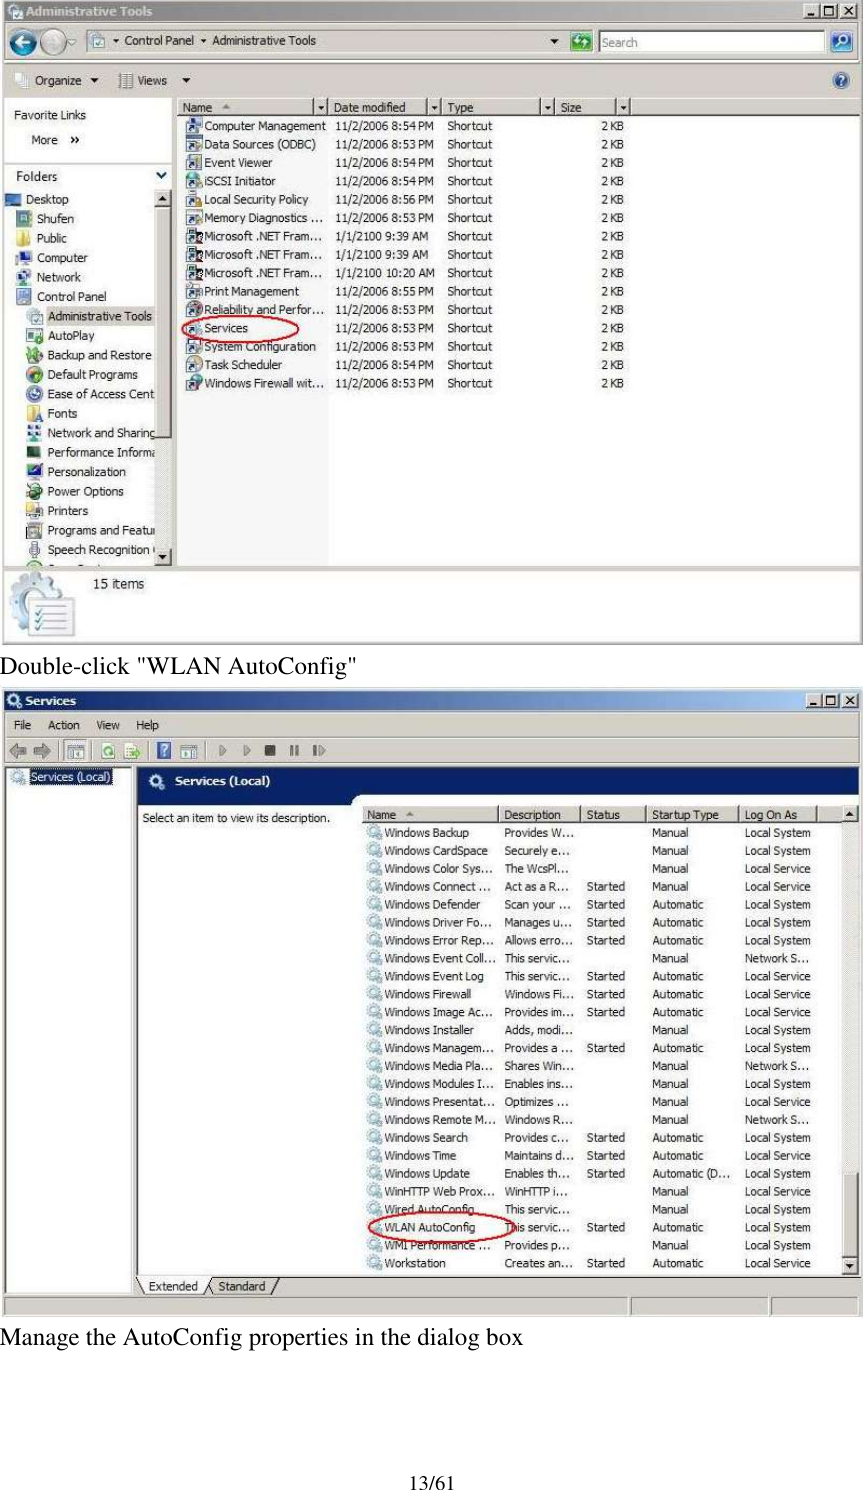 13/61Double-click &quot;WLAN AutoConfig&quot;Manage the AutoConfig properties in the dialog box